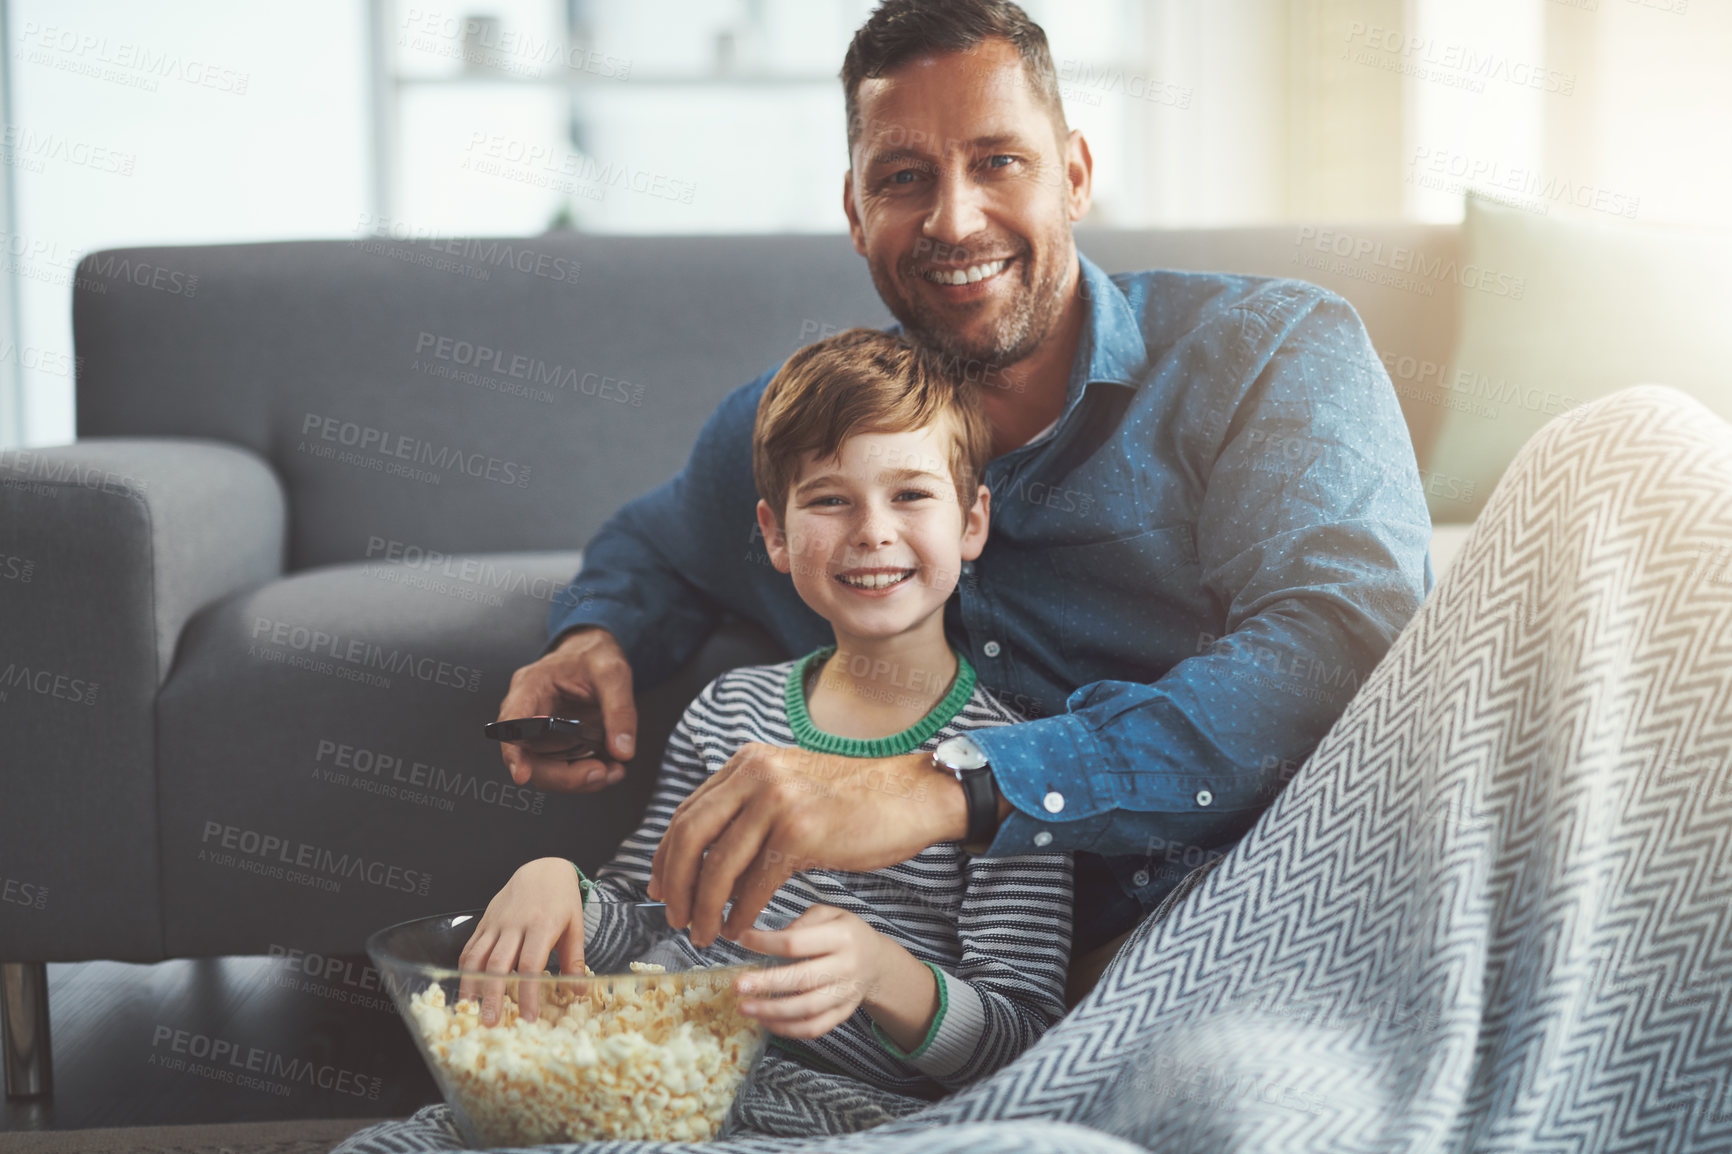 Buy stock photo Portrait of a carefree young boy and his father watching a movie together while being seated on the floor and eating popcorn at home during the day